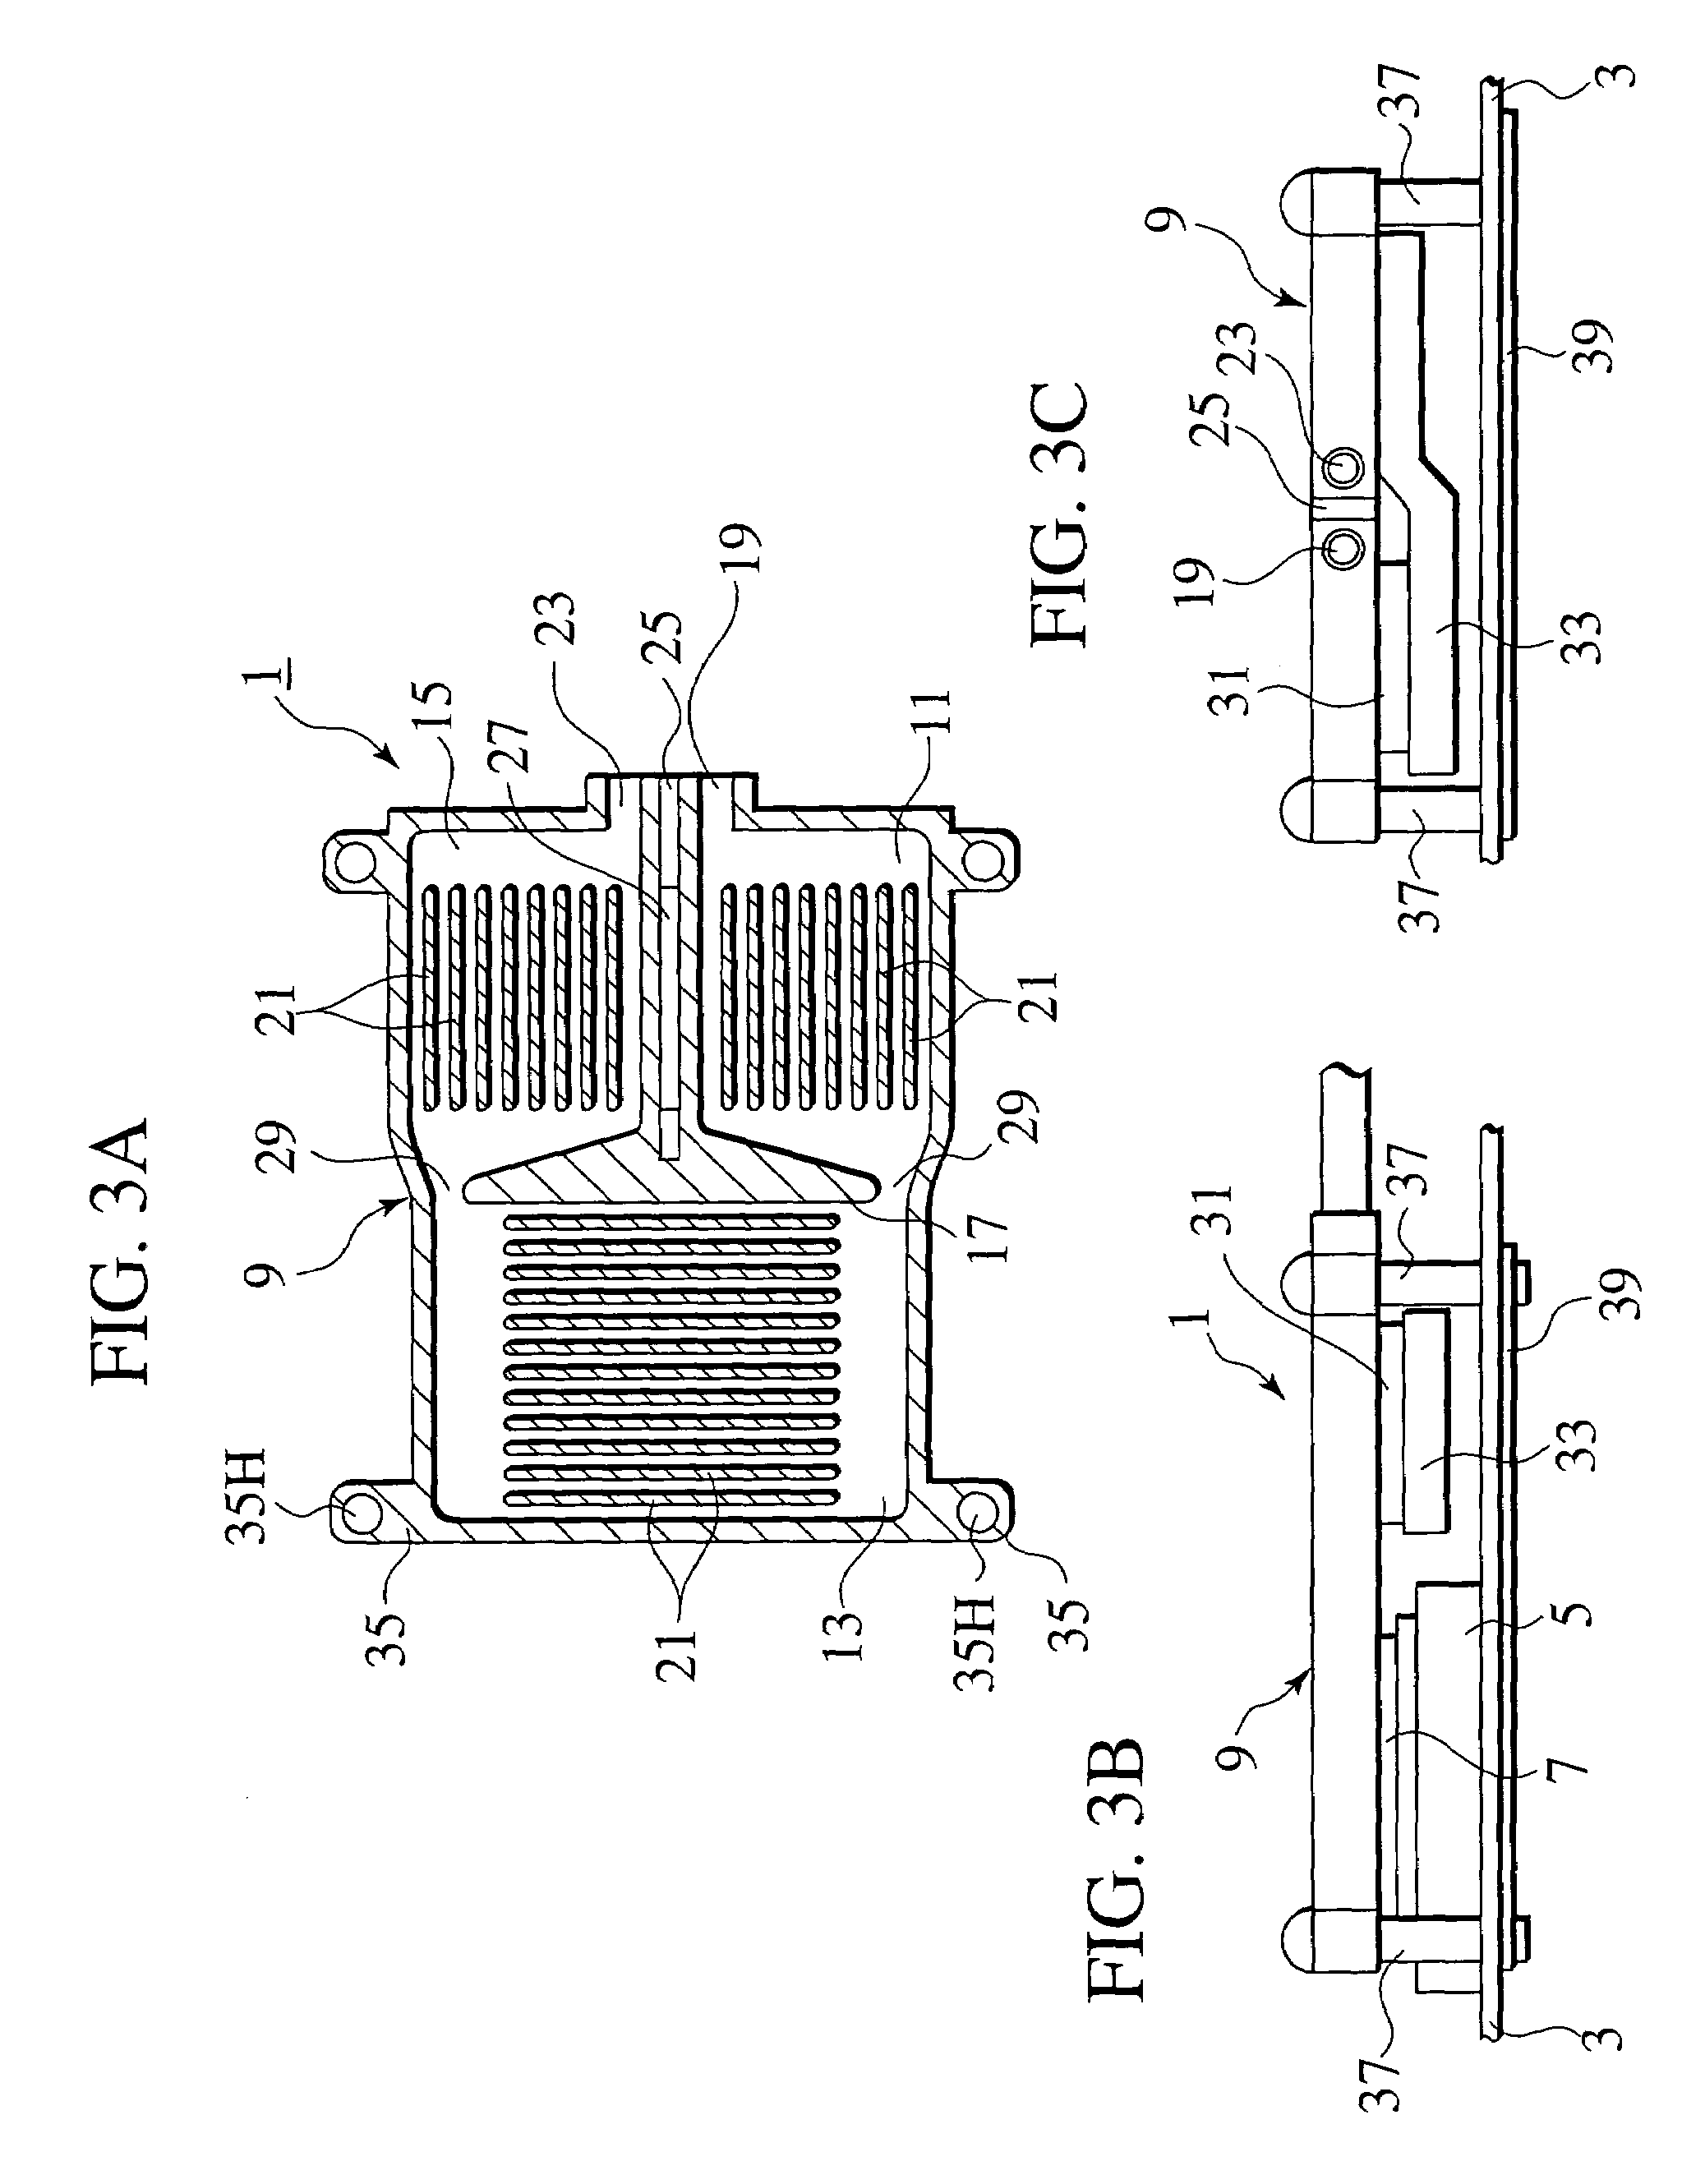 Cooling device for electronic element producing concentrated heat and electronic device